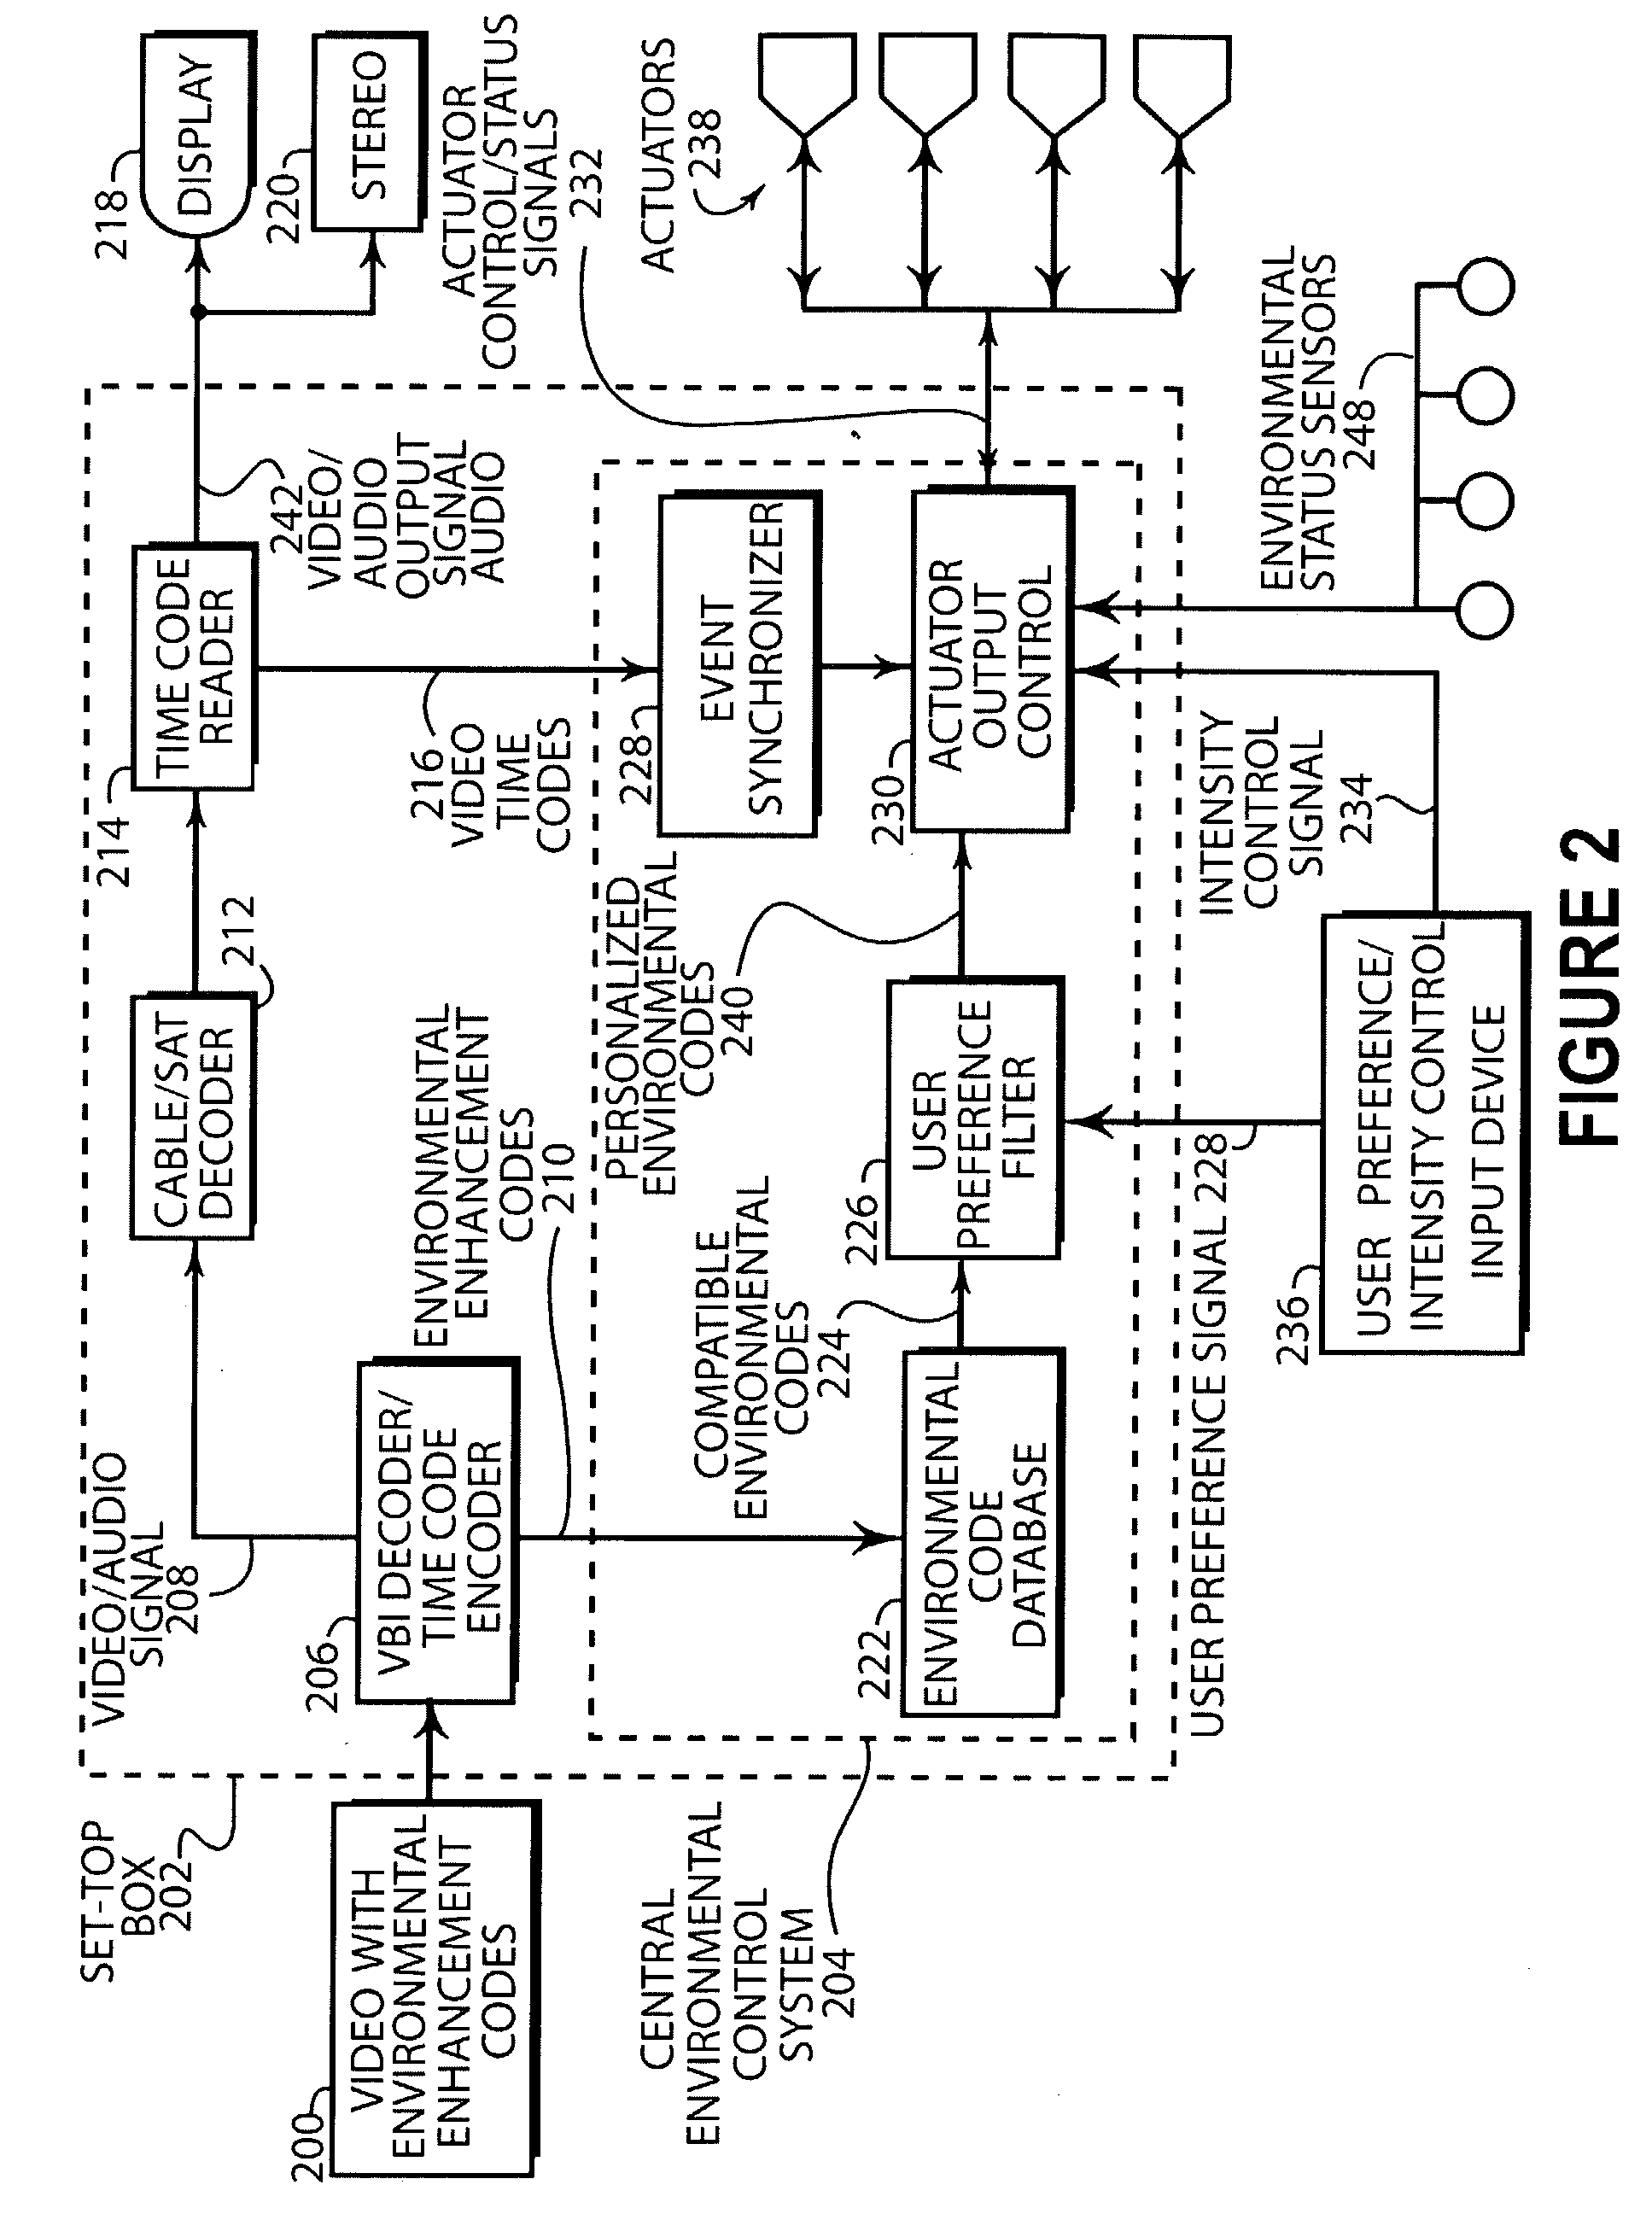 Method and apparatus for a data receiver and controller for the facilitation of an enhanced television viewing environment